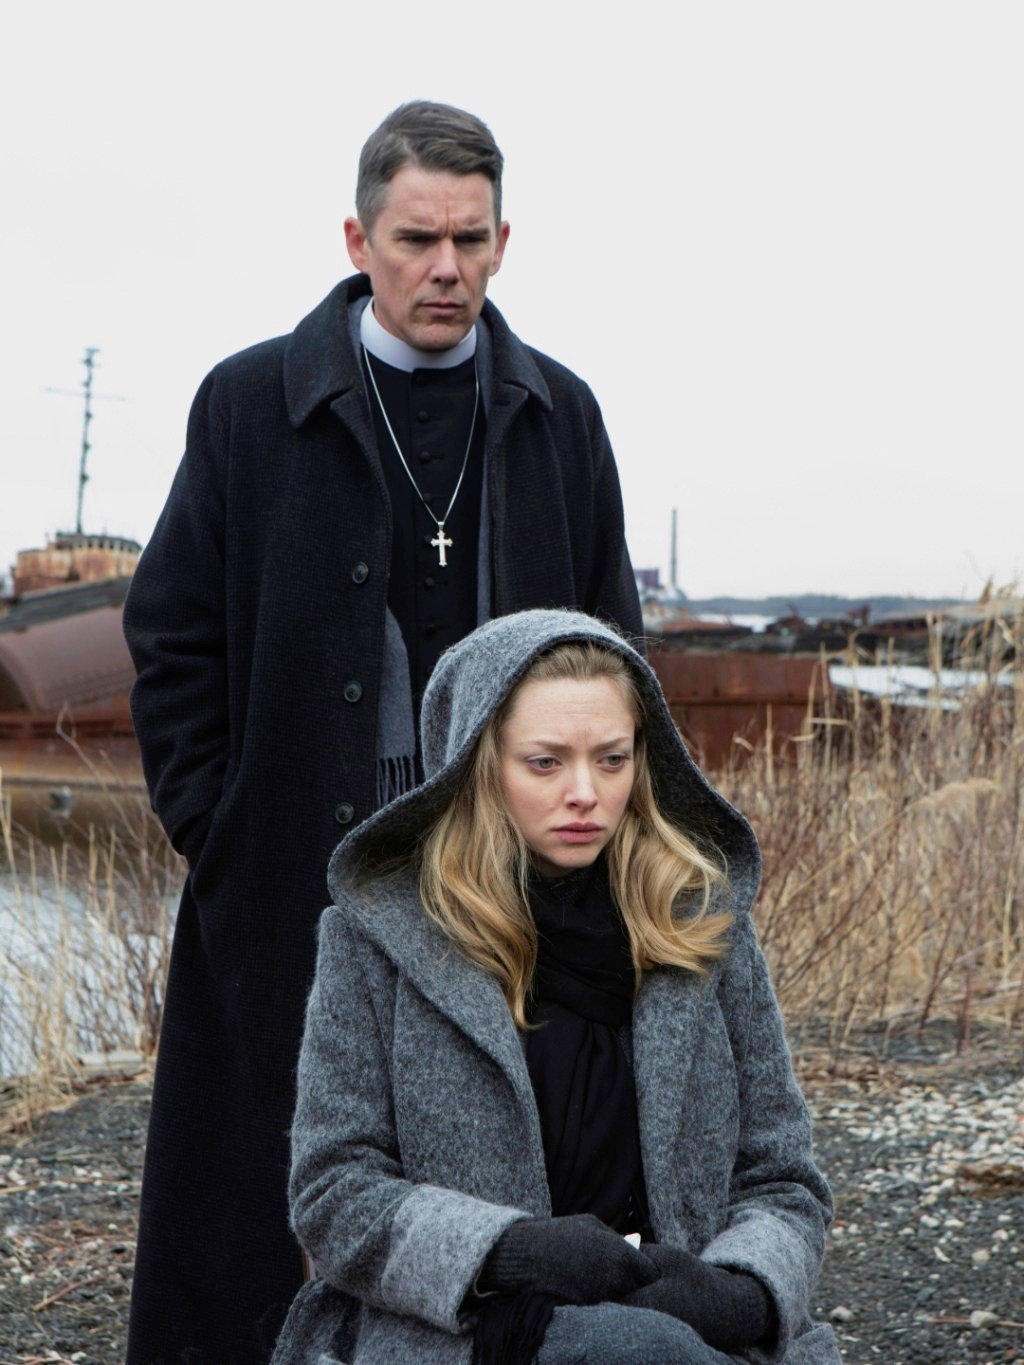 Ethan Hawke stars as Toller and Amanda Seyfried stars as Mary in A24's First Reformed (2018)